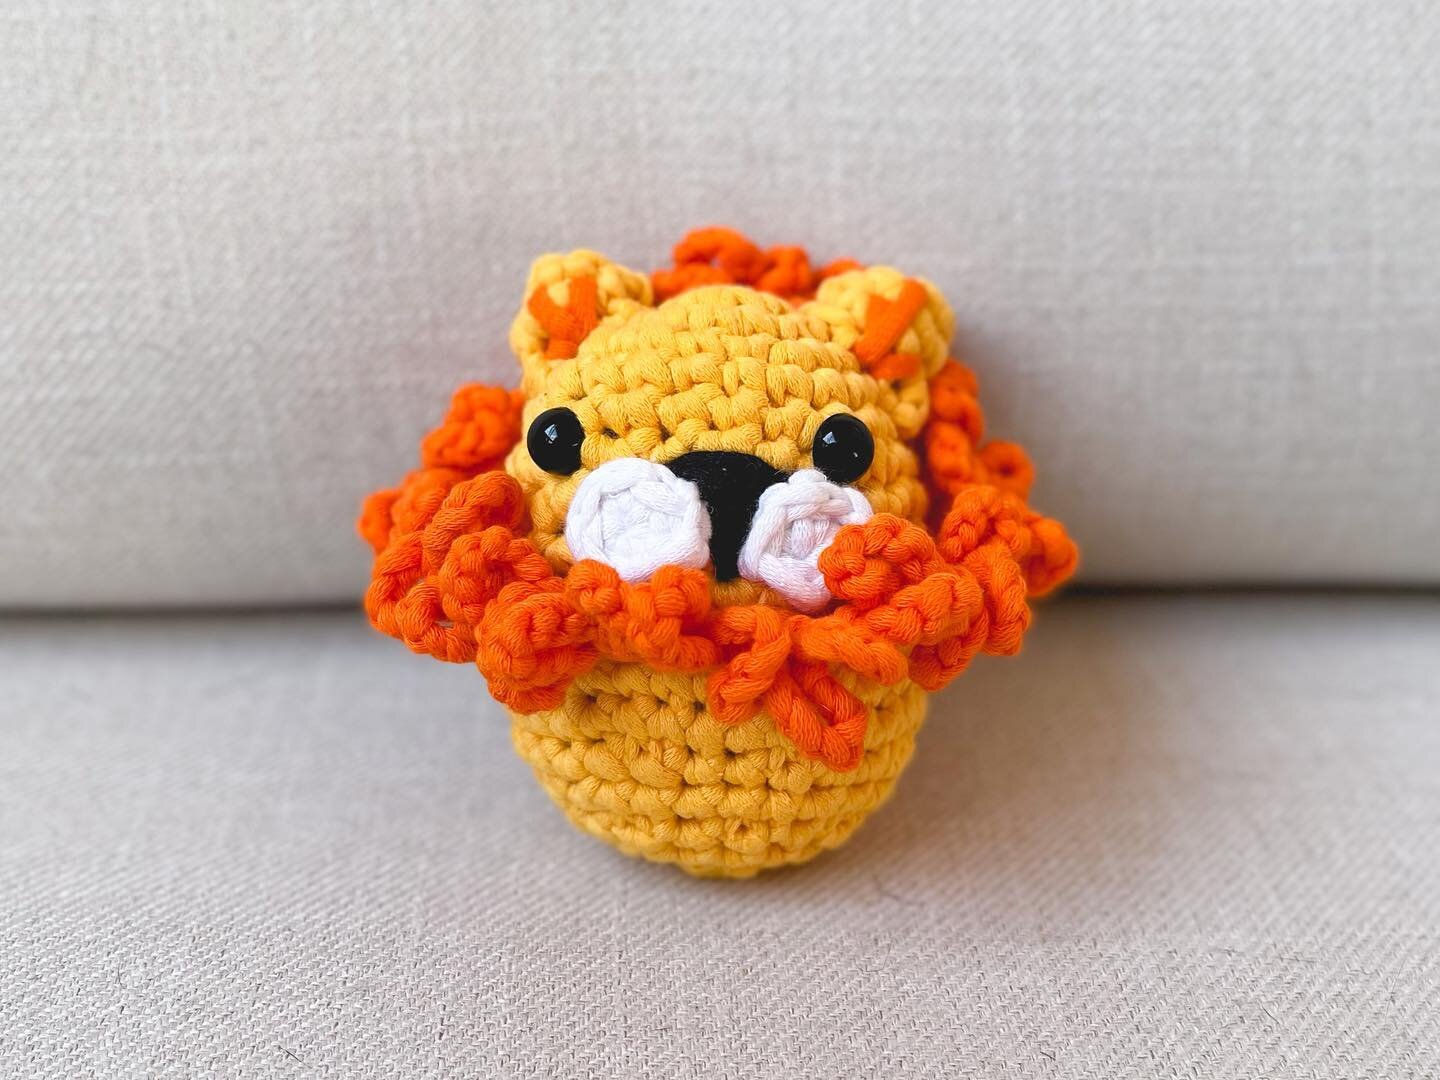 Tried crocheting for the first time after I caved an Insta ad lol and it was a lot of fun! @thewoobles 
-
#crochet #crochetkit #lion #sebastianthelion #roar #toy #doll #amigurumi #thewoobles #thewoobleslion